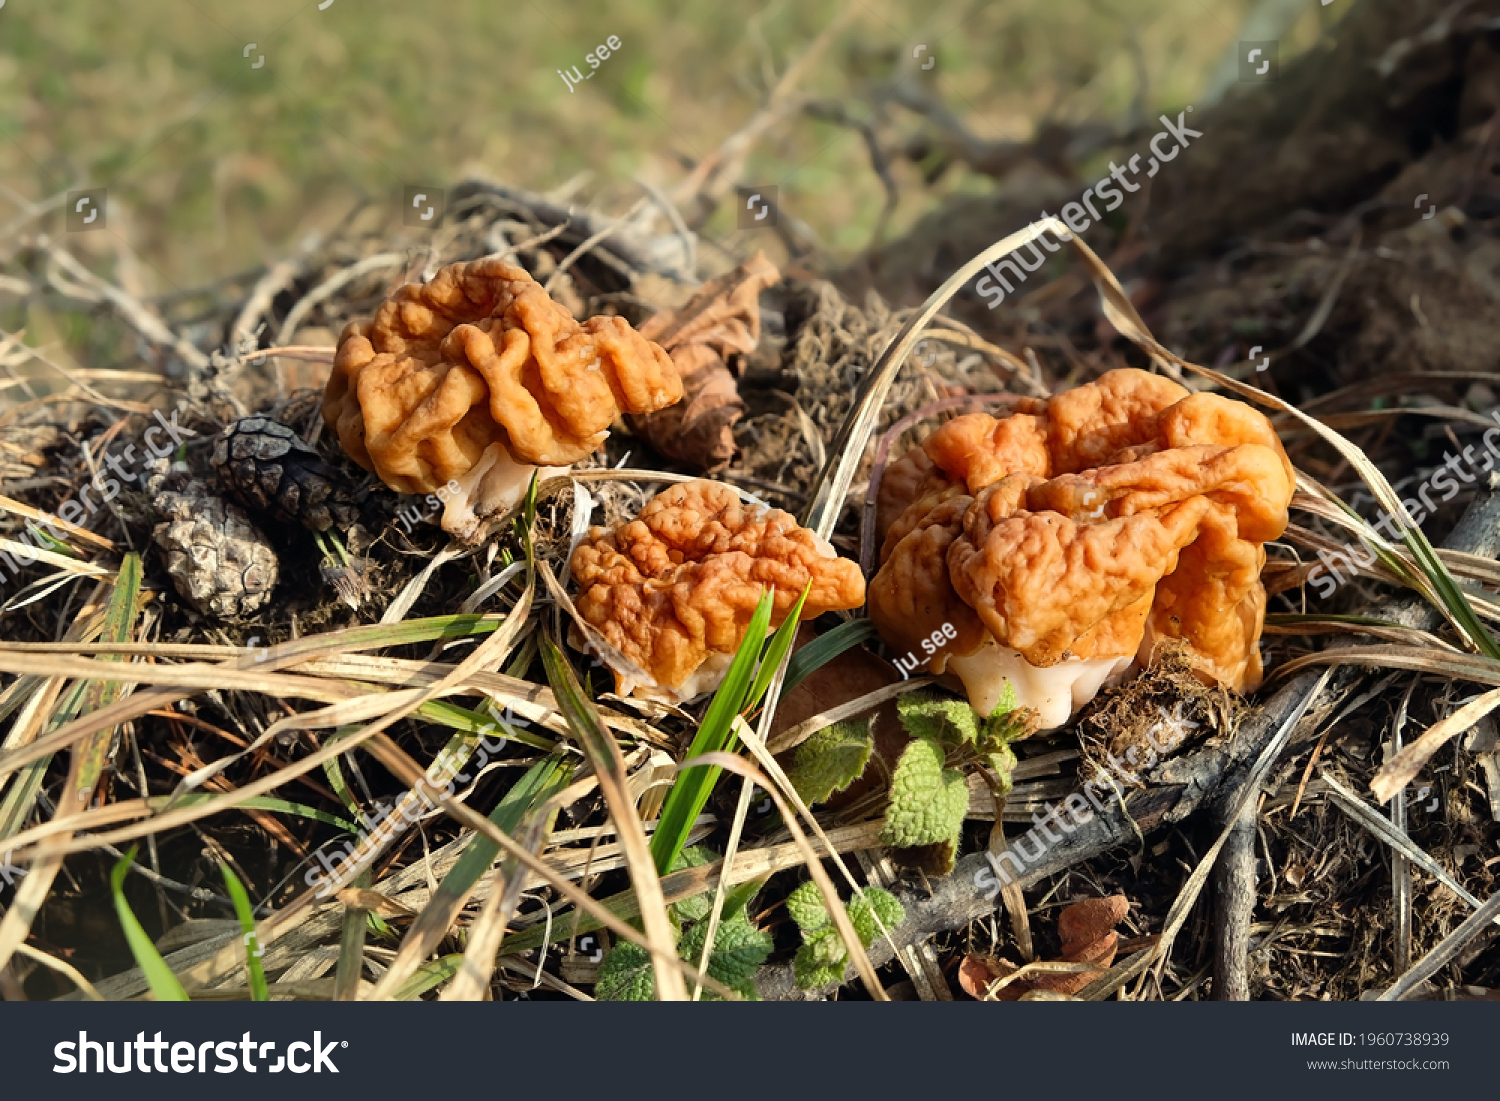 Gyromitra gigas mushrooms growth in grass close up. early spring season, fresh mushrooms picking in forest. ascomycete fungus from the genus Gyromitra #1960738939